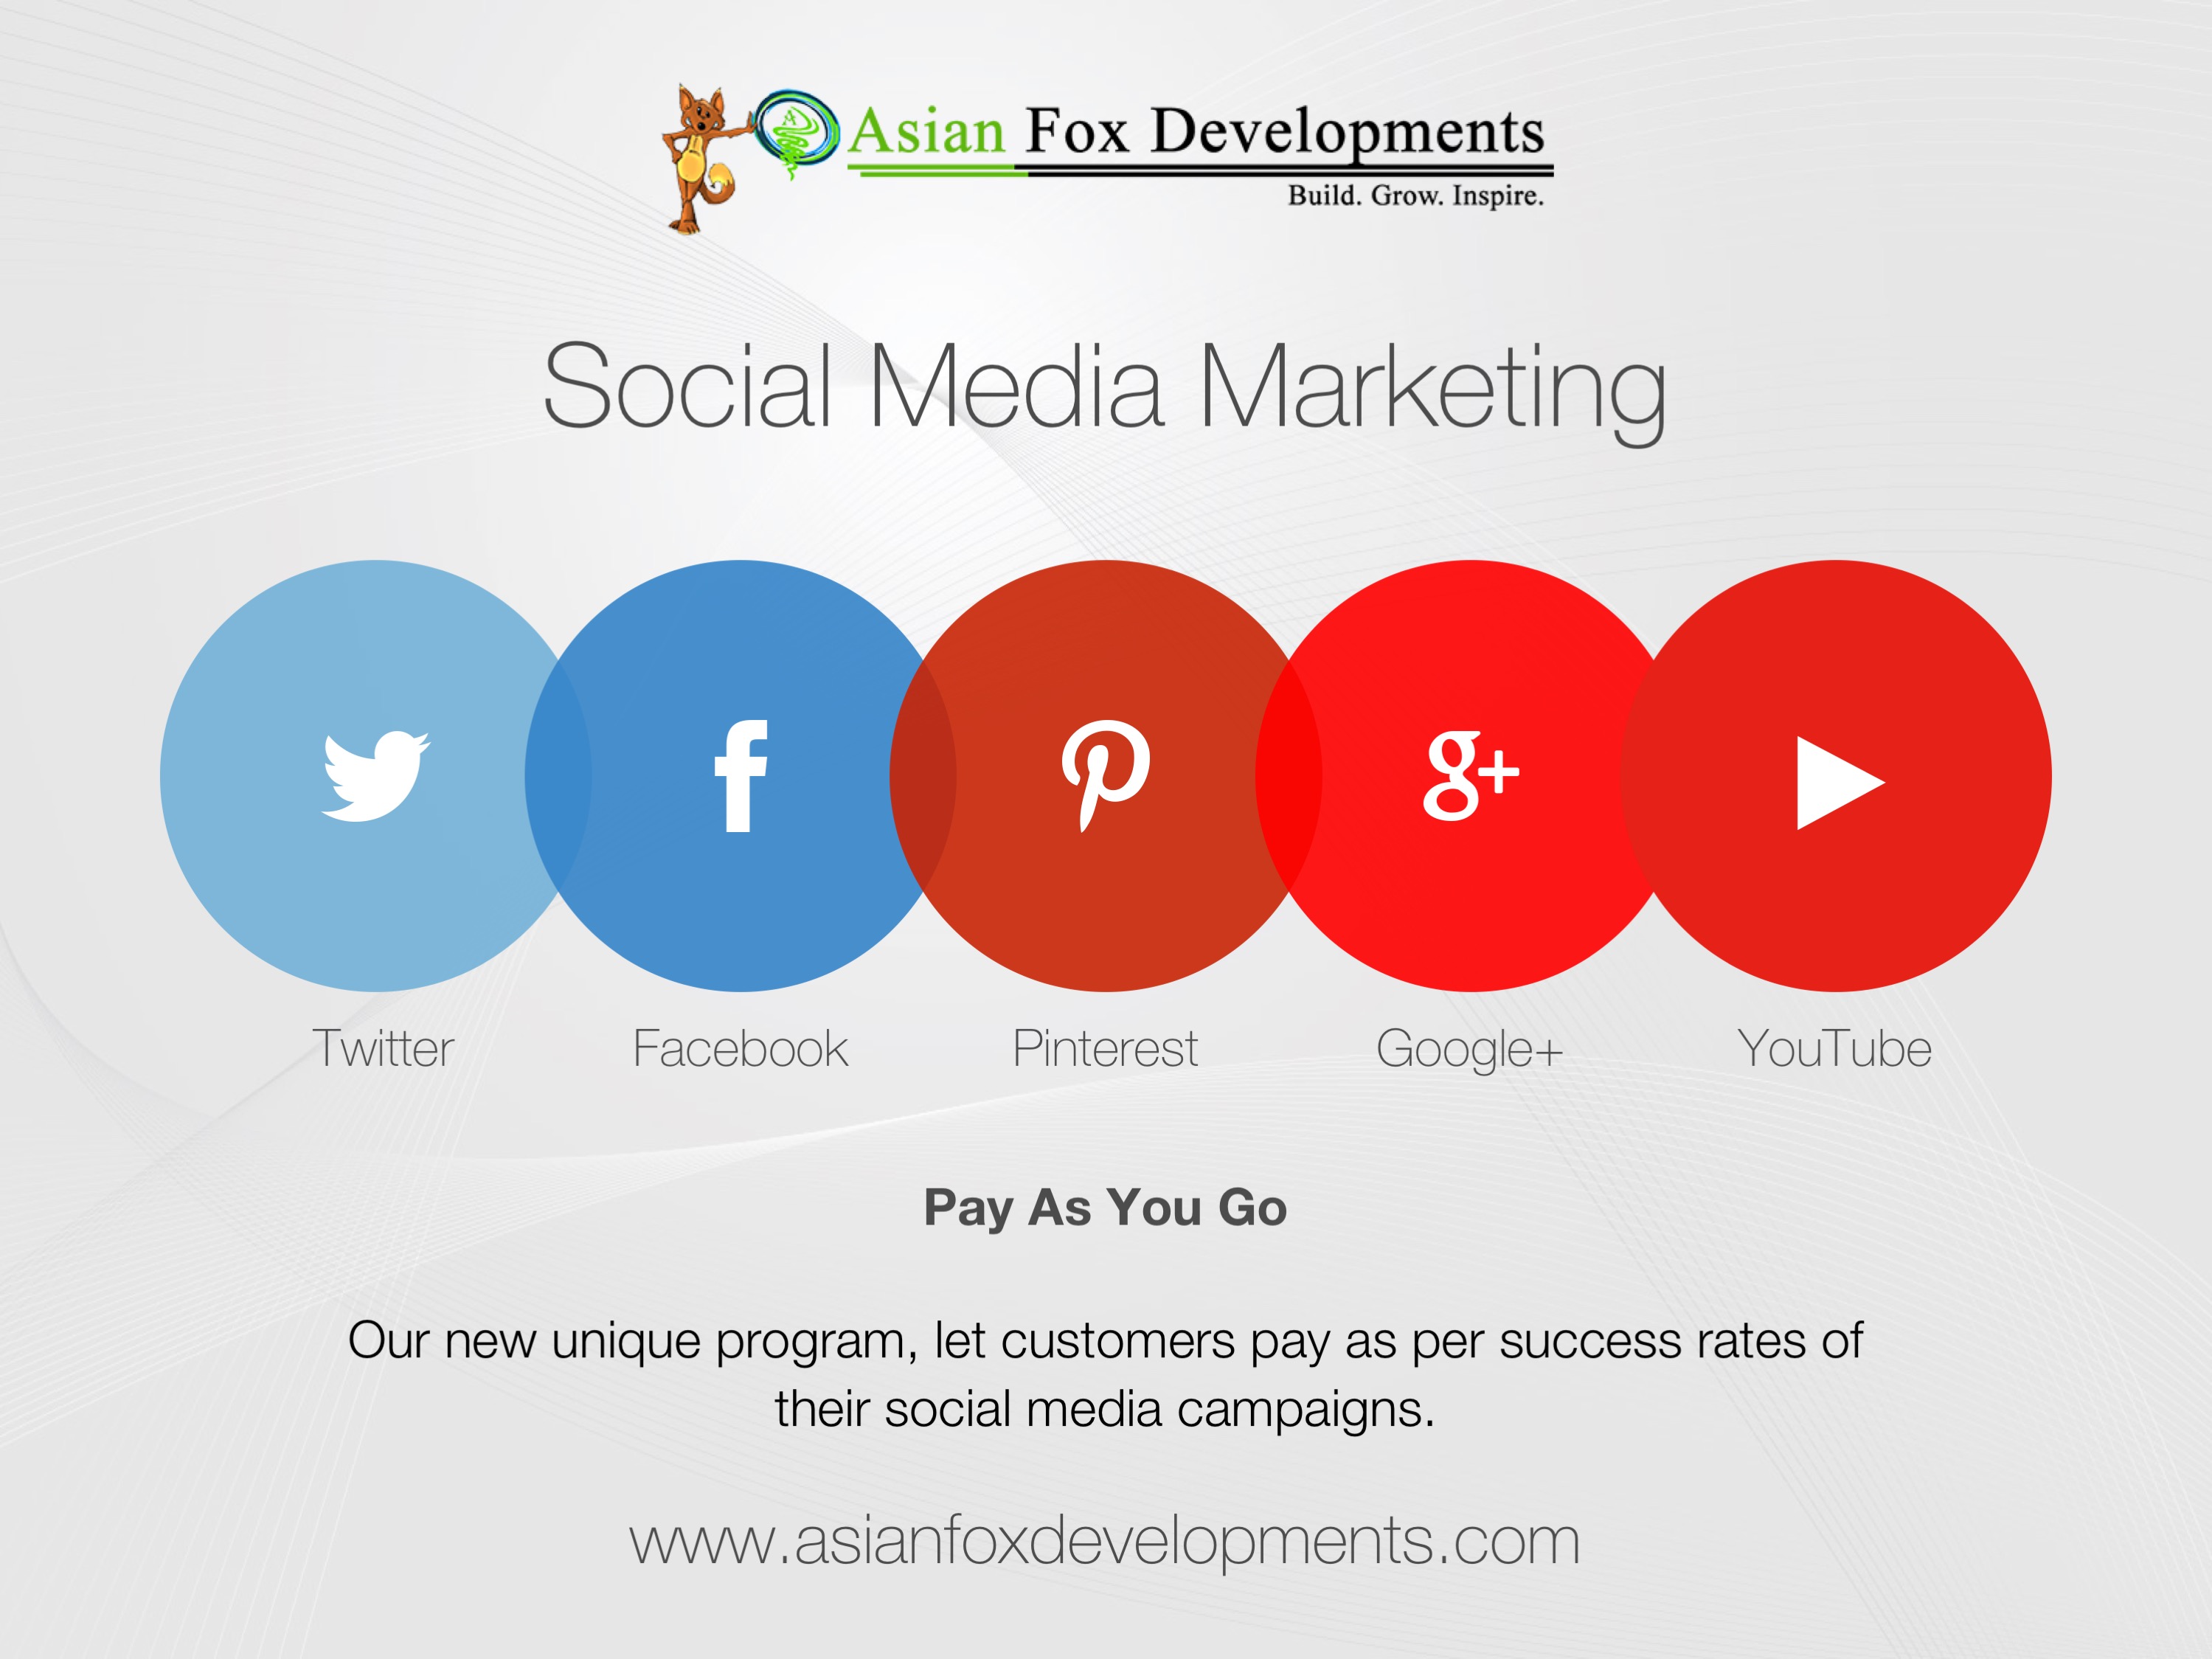 Social Media Marketing (SMM) Pay As You Go - Our new unique program let customers pay as per success rates of their social media campaigns Only at www.asianfoxdevelopments.com